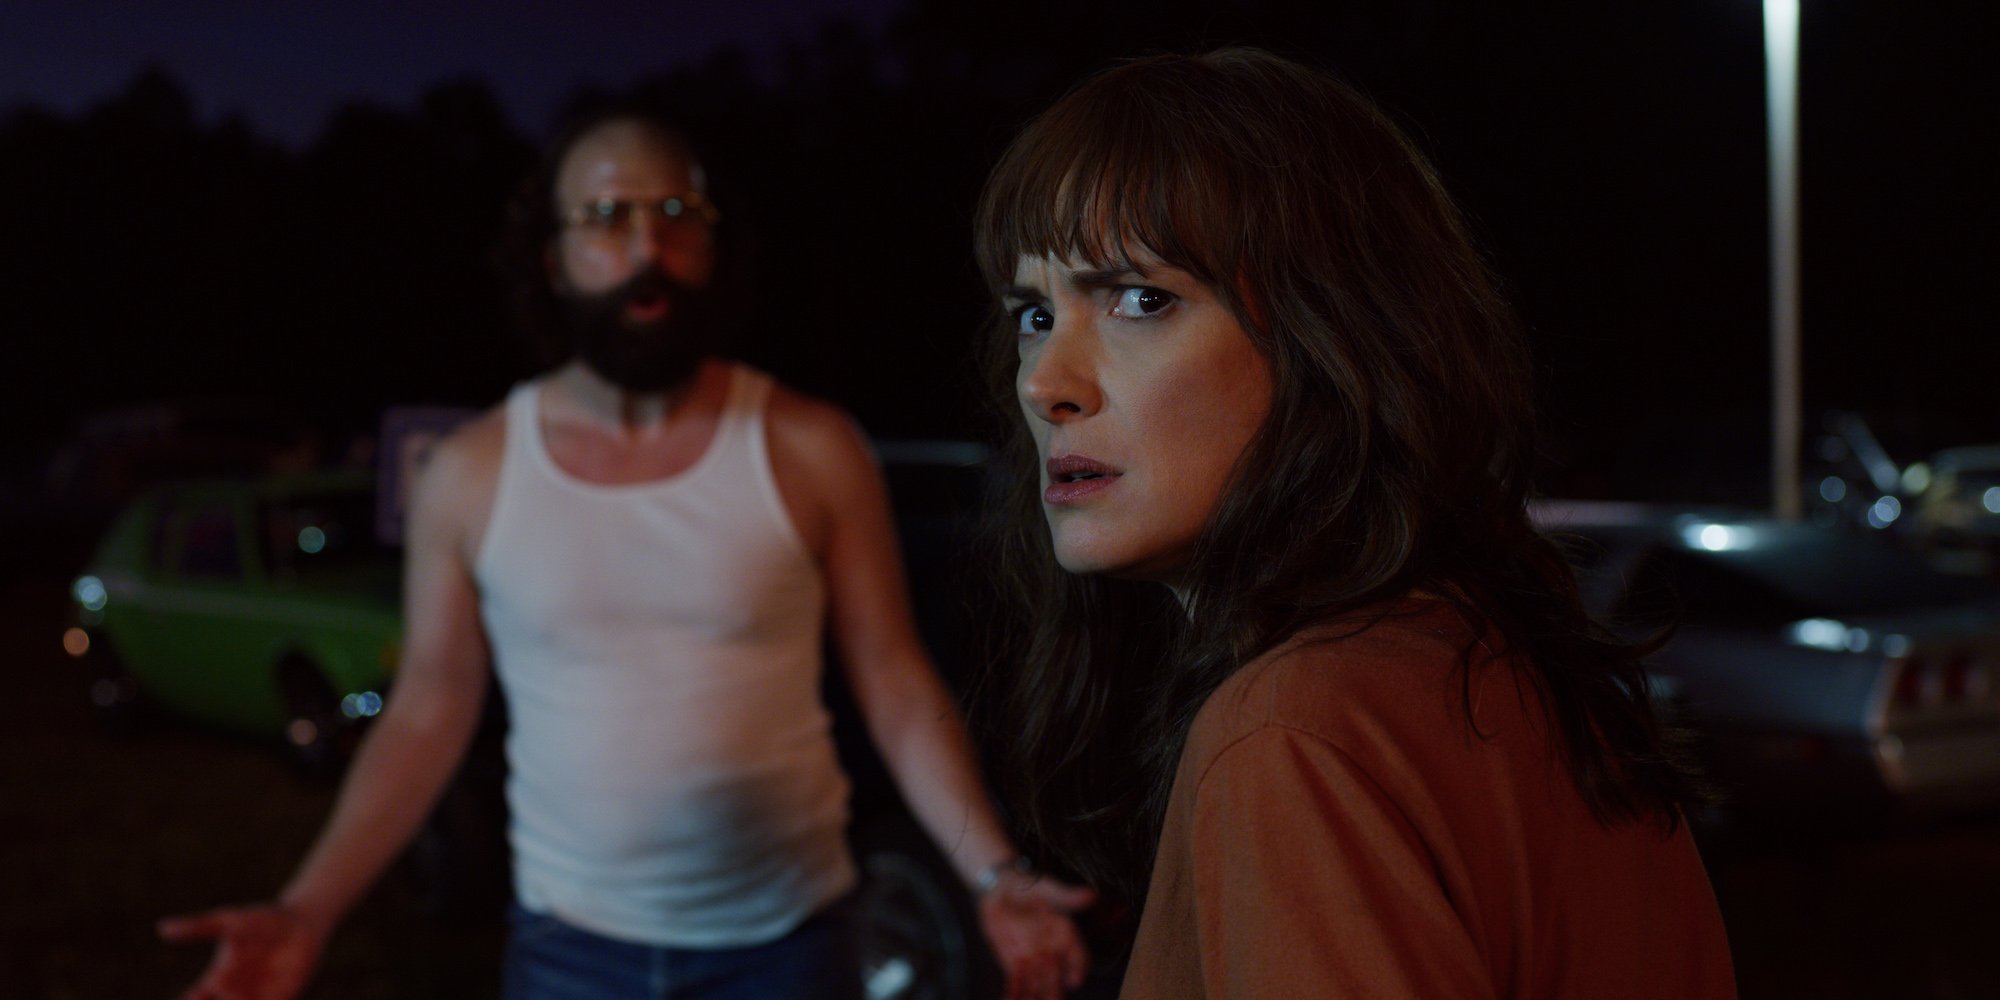 Joyce Byers, played by Winona Ryder, in a production still from 'Stranger Things' Season 3